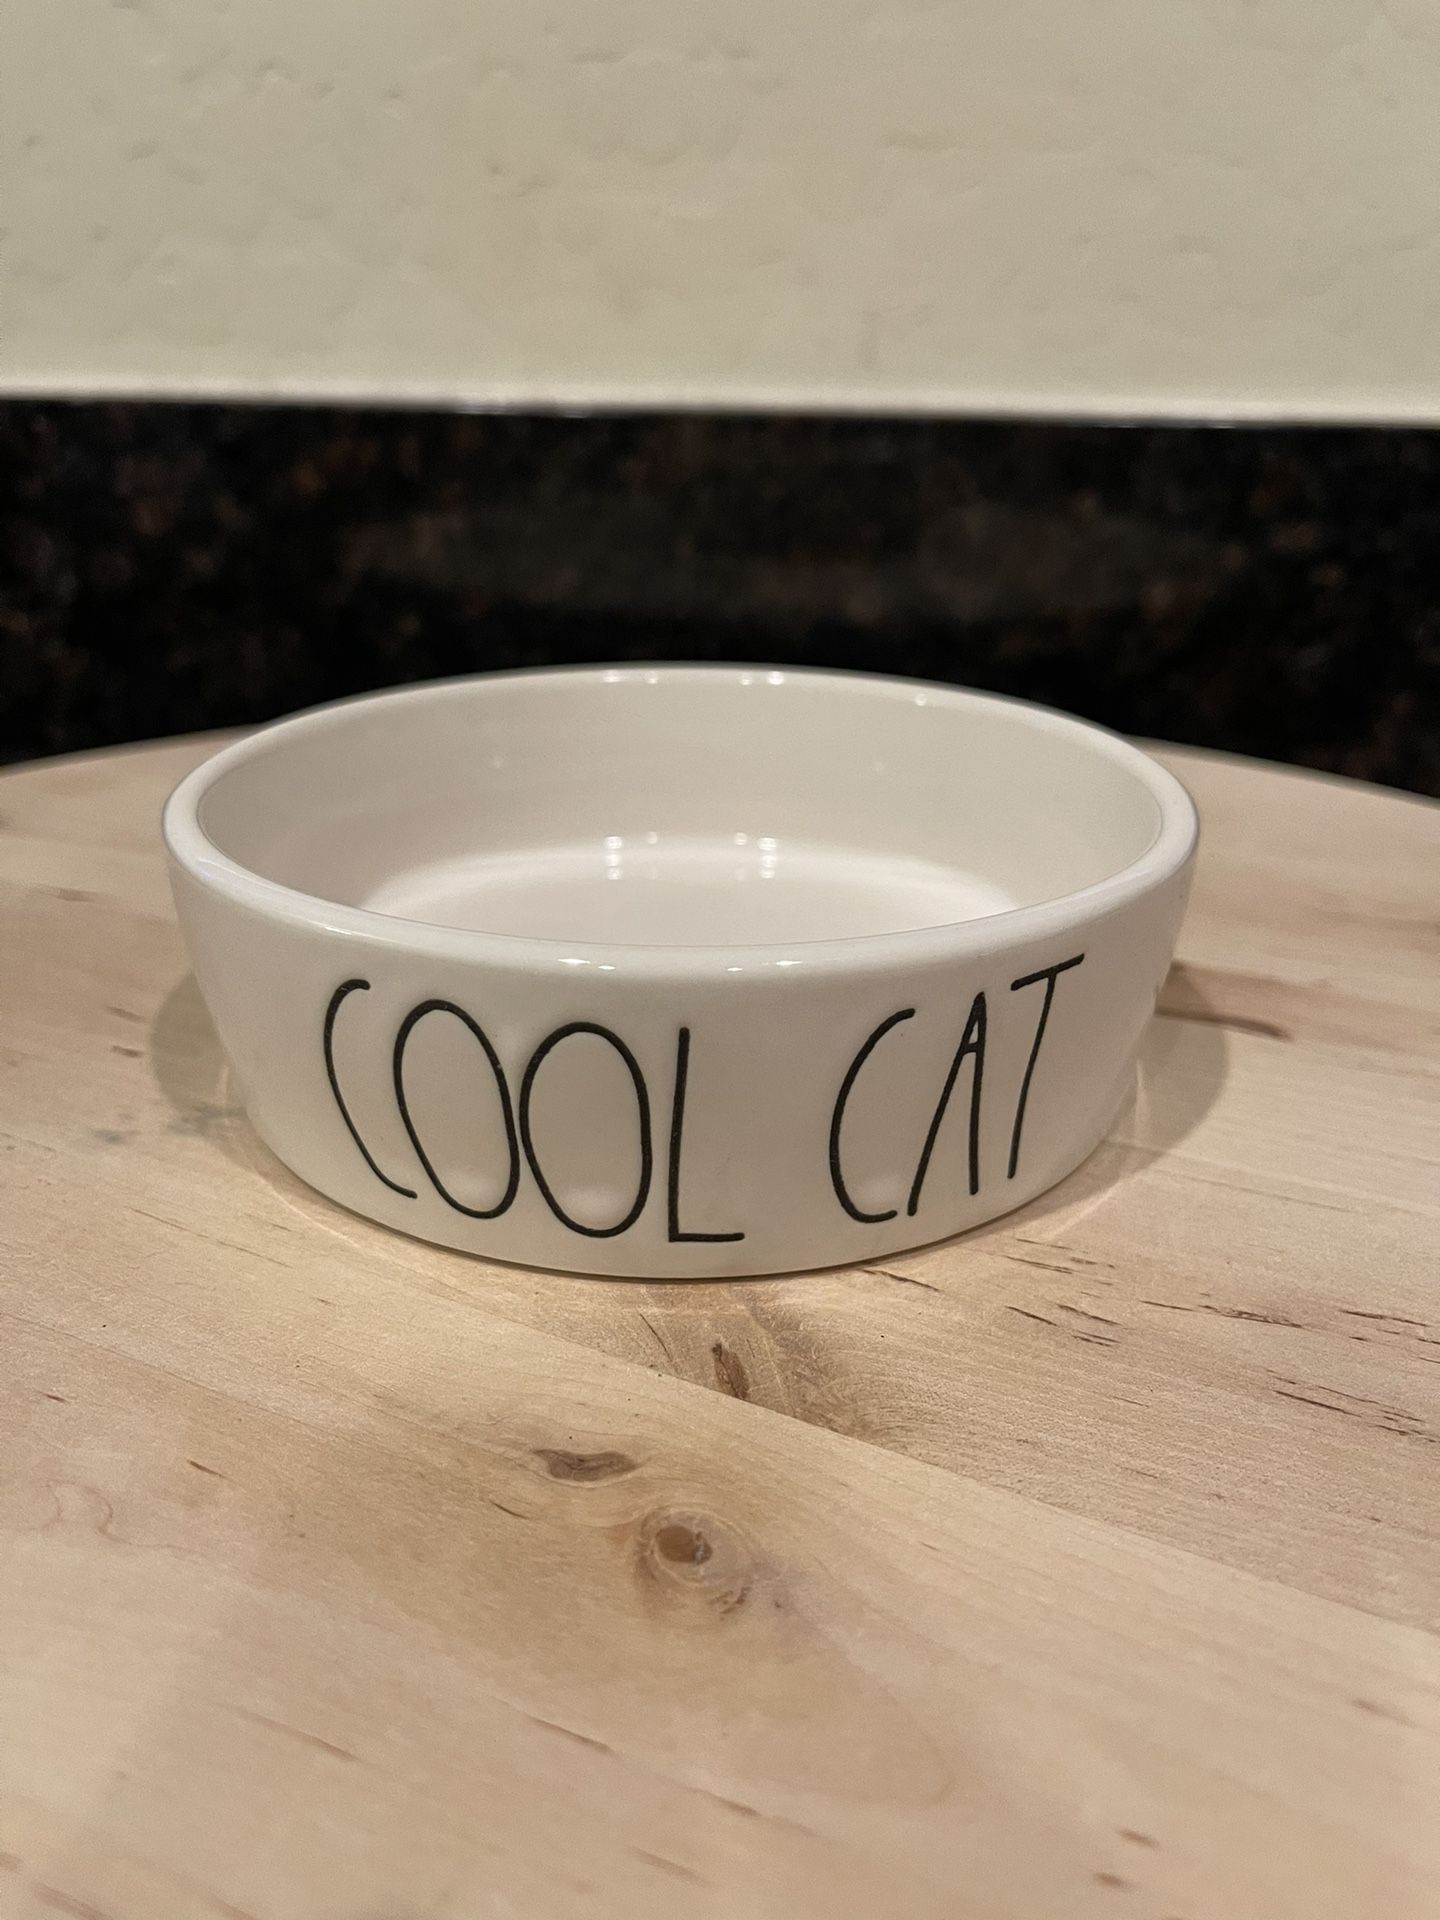 Rae Dunn "CooL Cat" Magenta Cat Bowl White 4.5 No chips or cracks  This is only for a cool cat.  If your cat is a nerd, please move on  If you don’t o